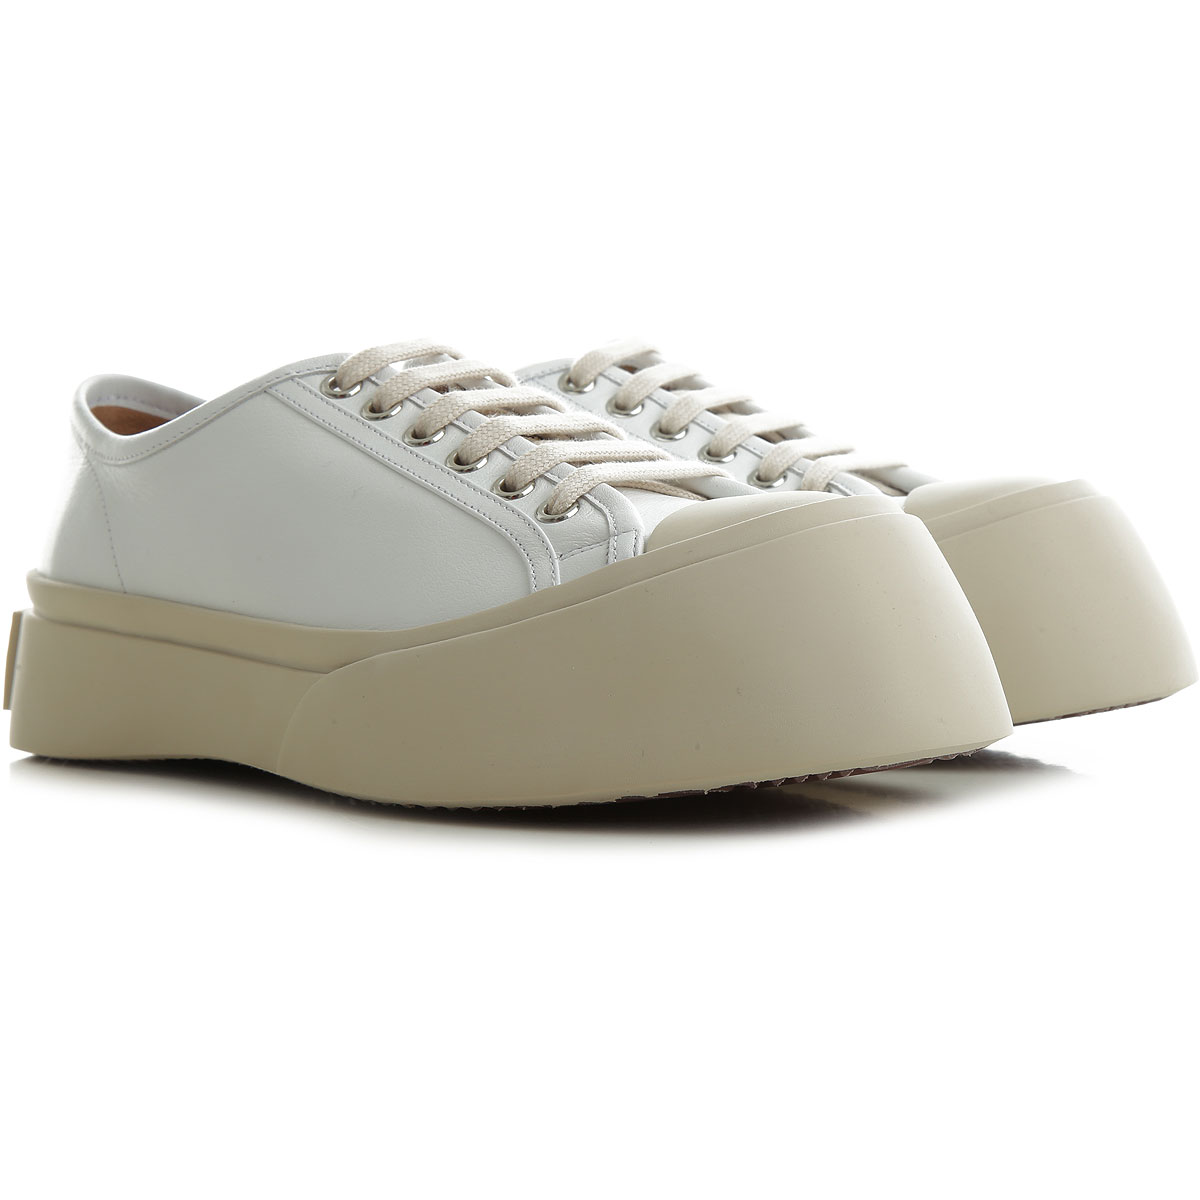 Womens Shoes Marni, Style code: snzw003020p2722-00w01-